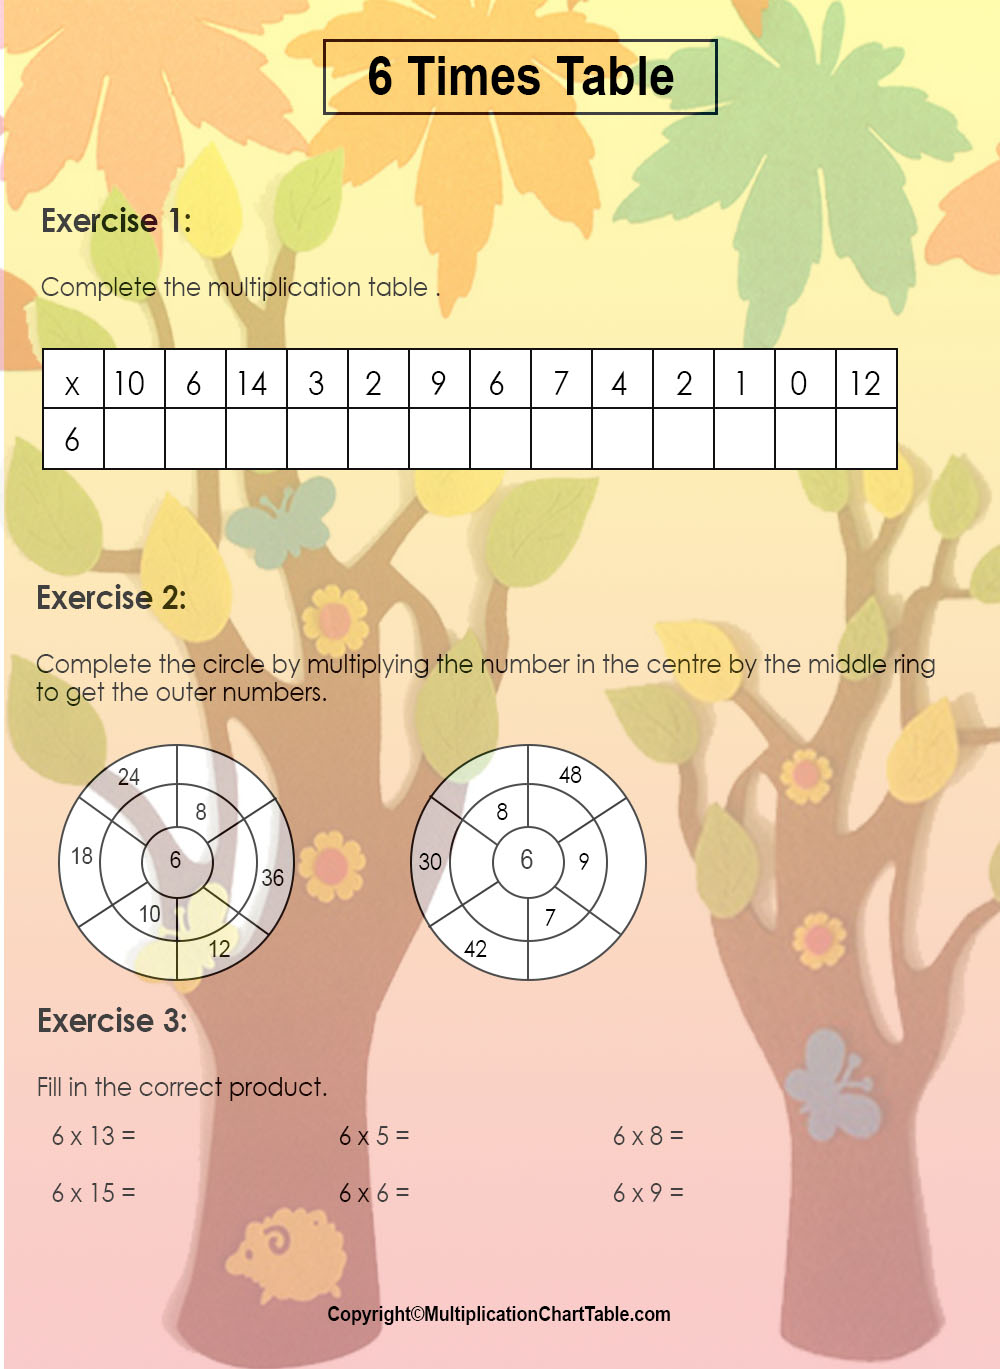 6 times table worksheets